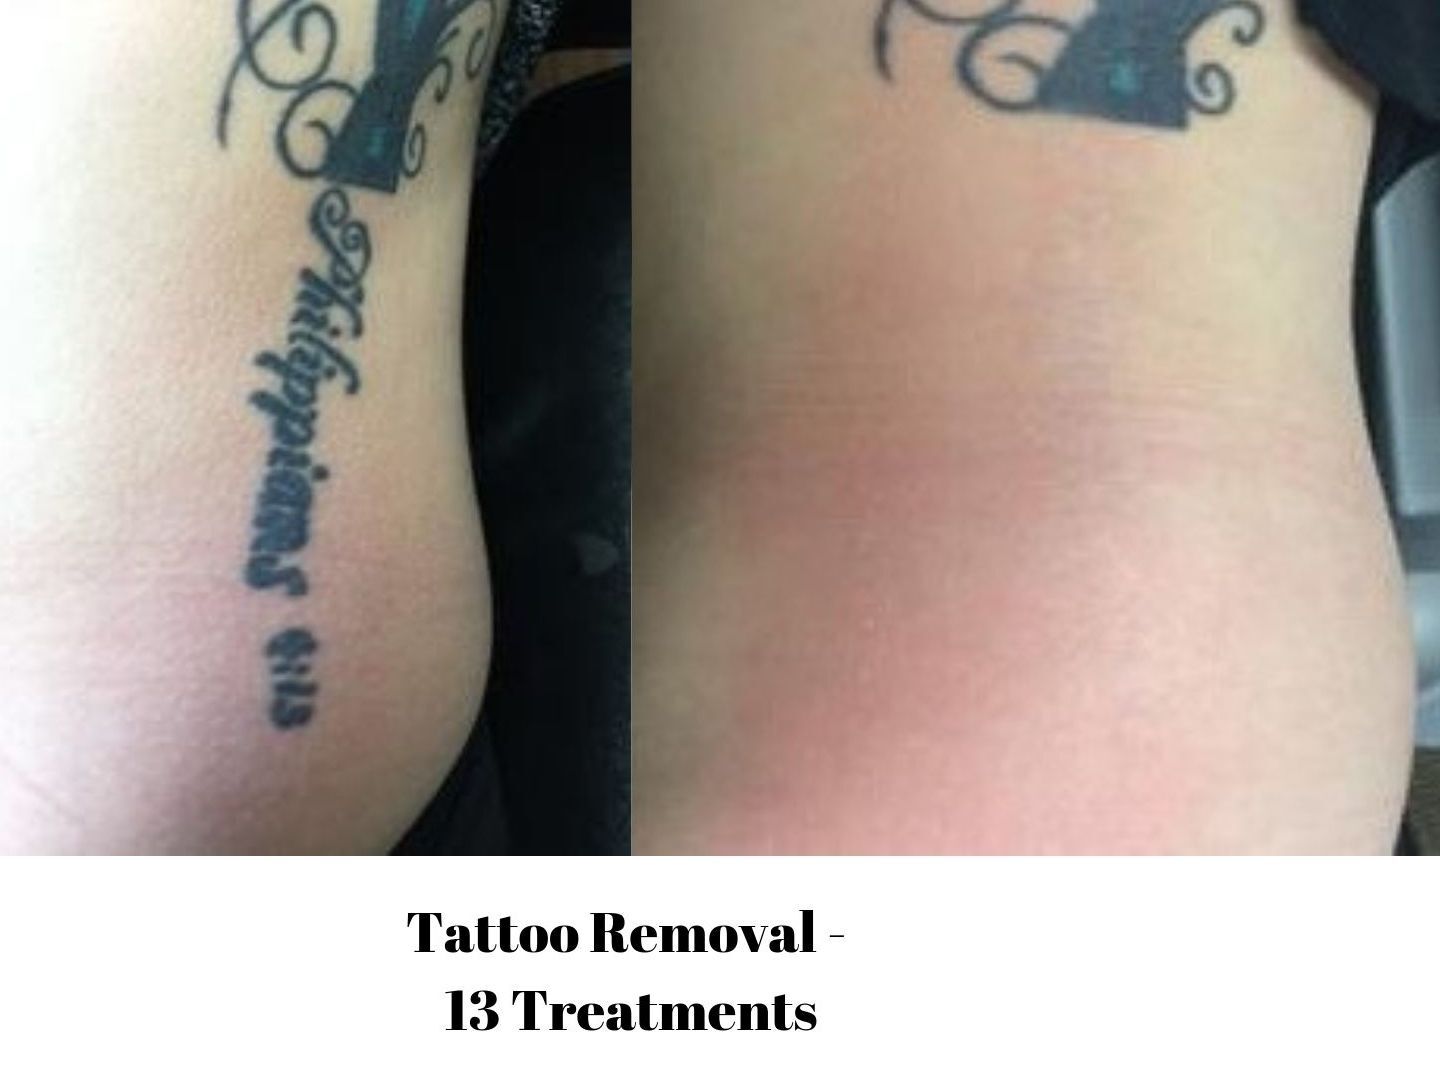 Tattoo Removal Ink Story - About Us